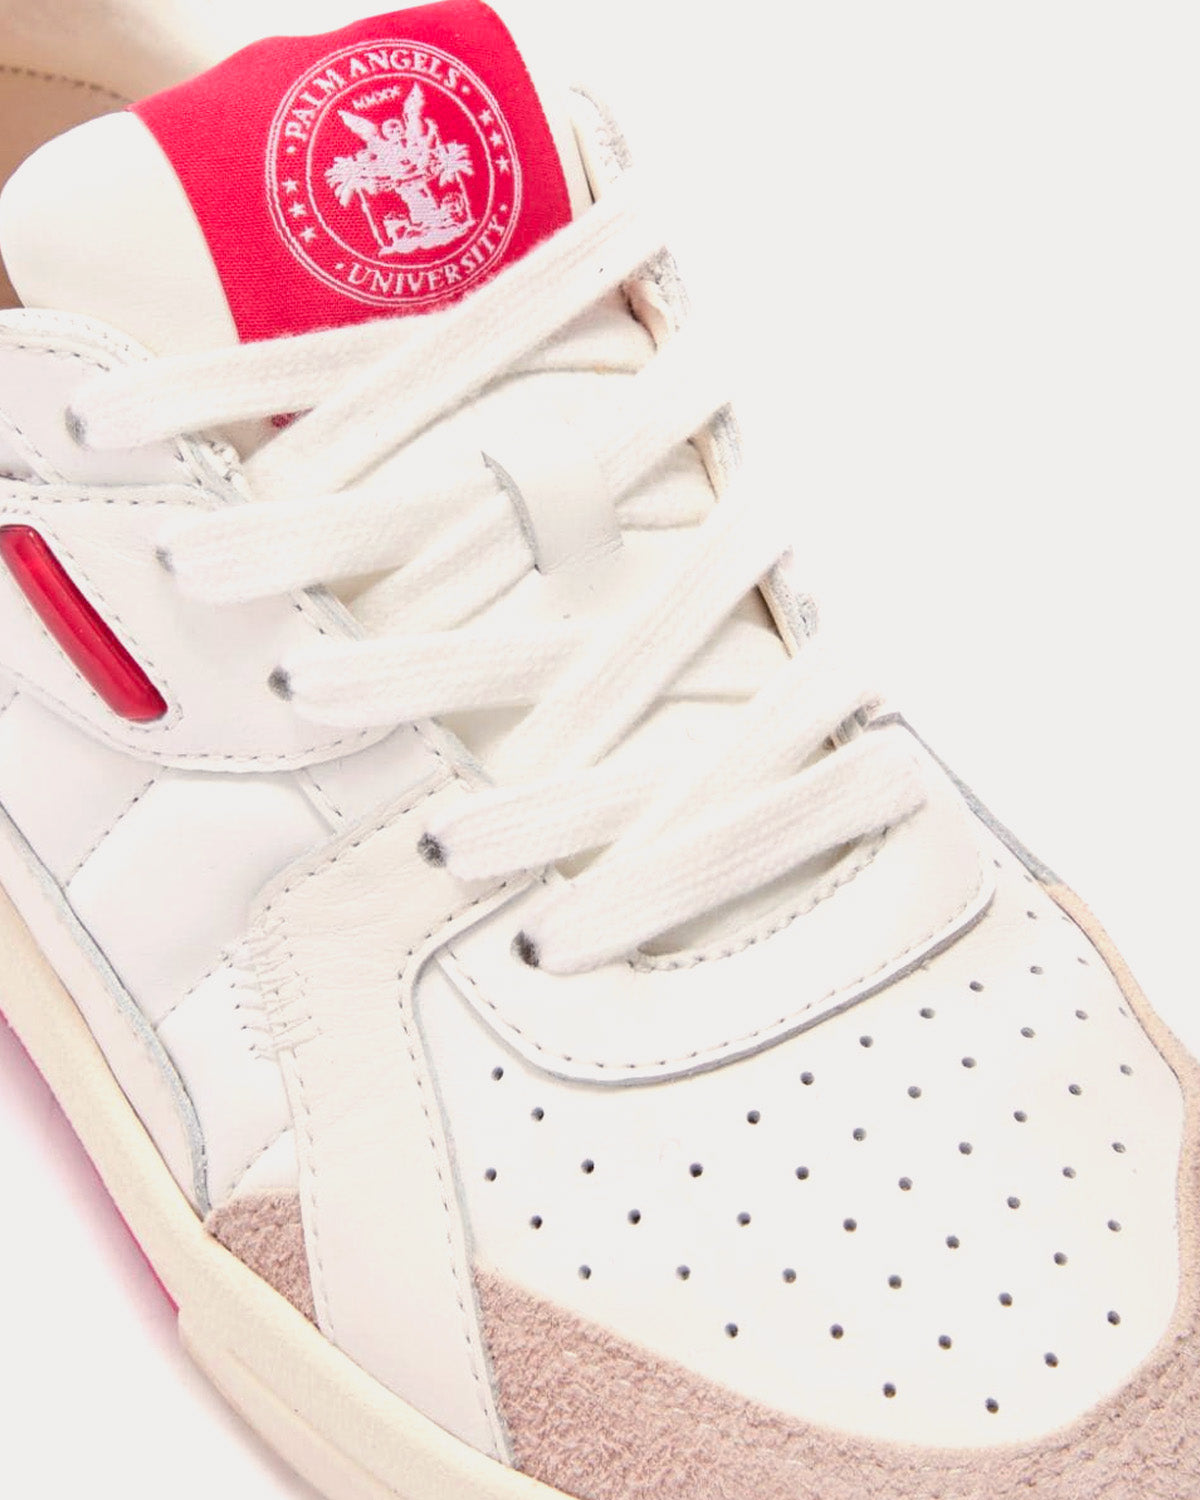 Palm Angels - University White / Fuchsia Low Top Sneakers